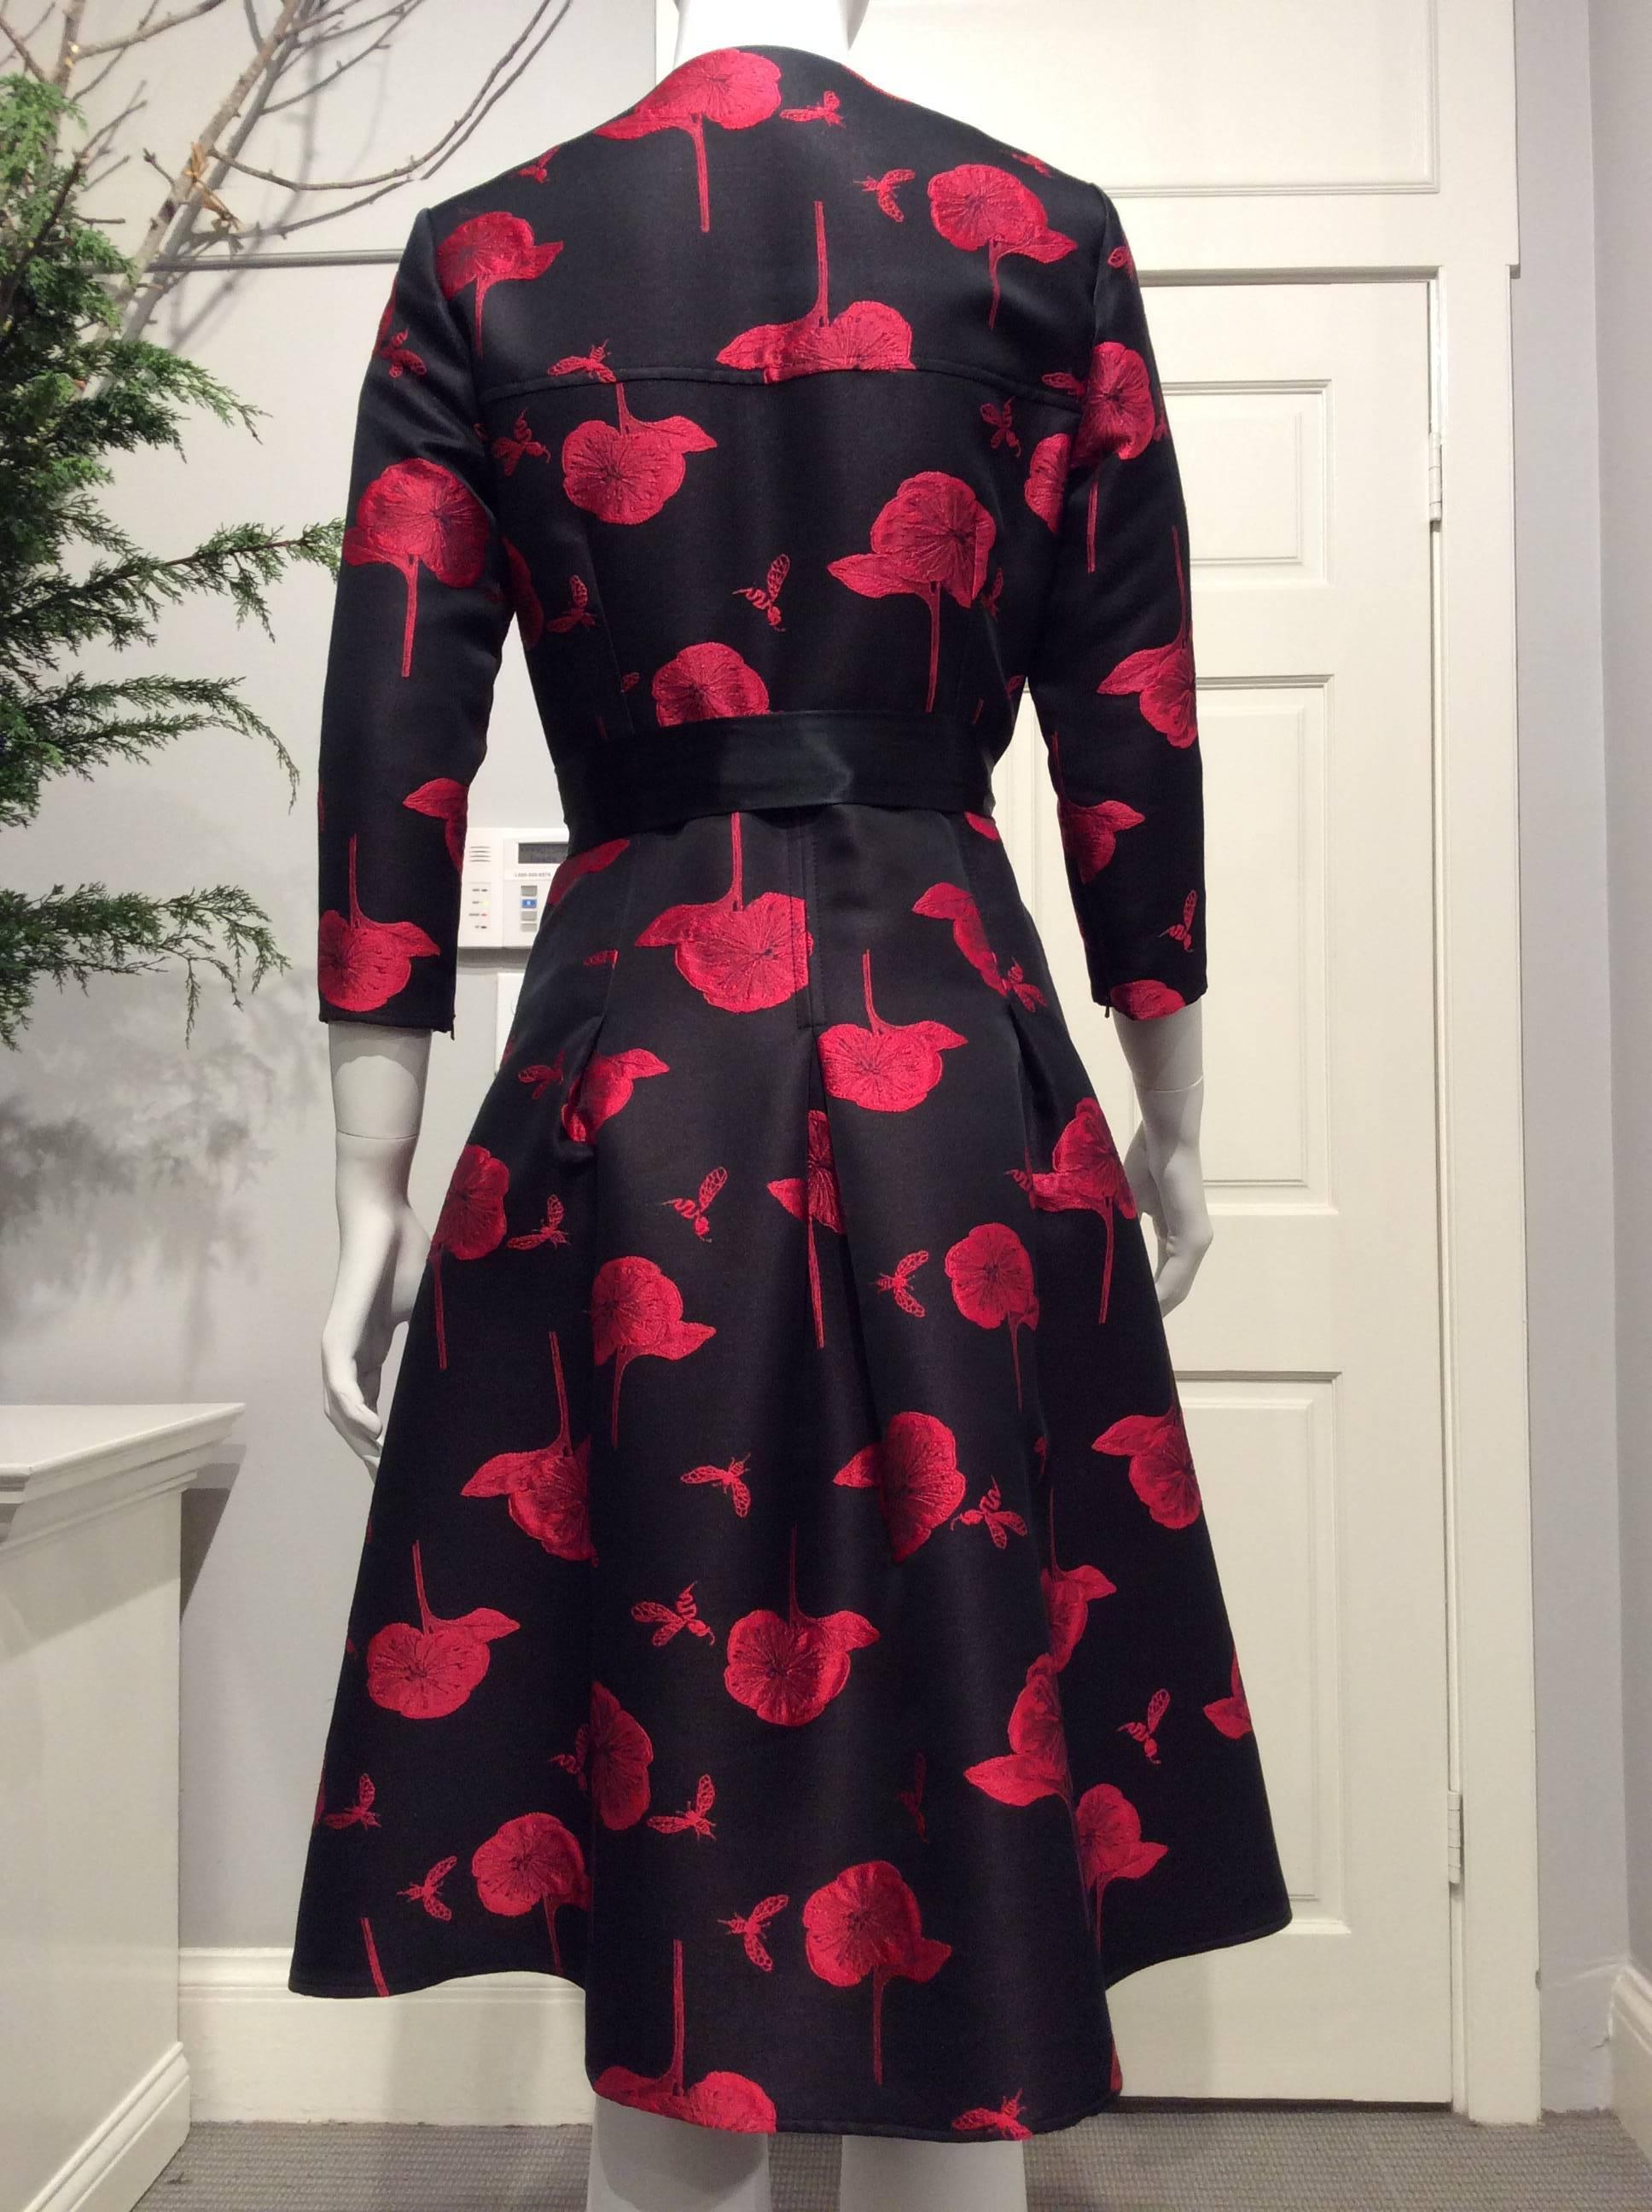 Coat dress in a black and magenta floral pattern. The narrow sleeves are 3/4 length and close with a hidden 4in long zipper on the inside seam. It closes in the front with eleven small black buttons. The top is lined in black silk. The soft pleats